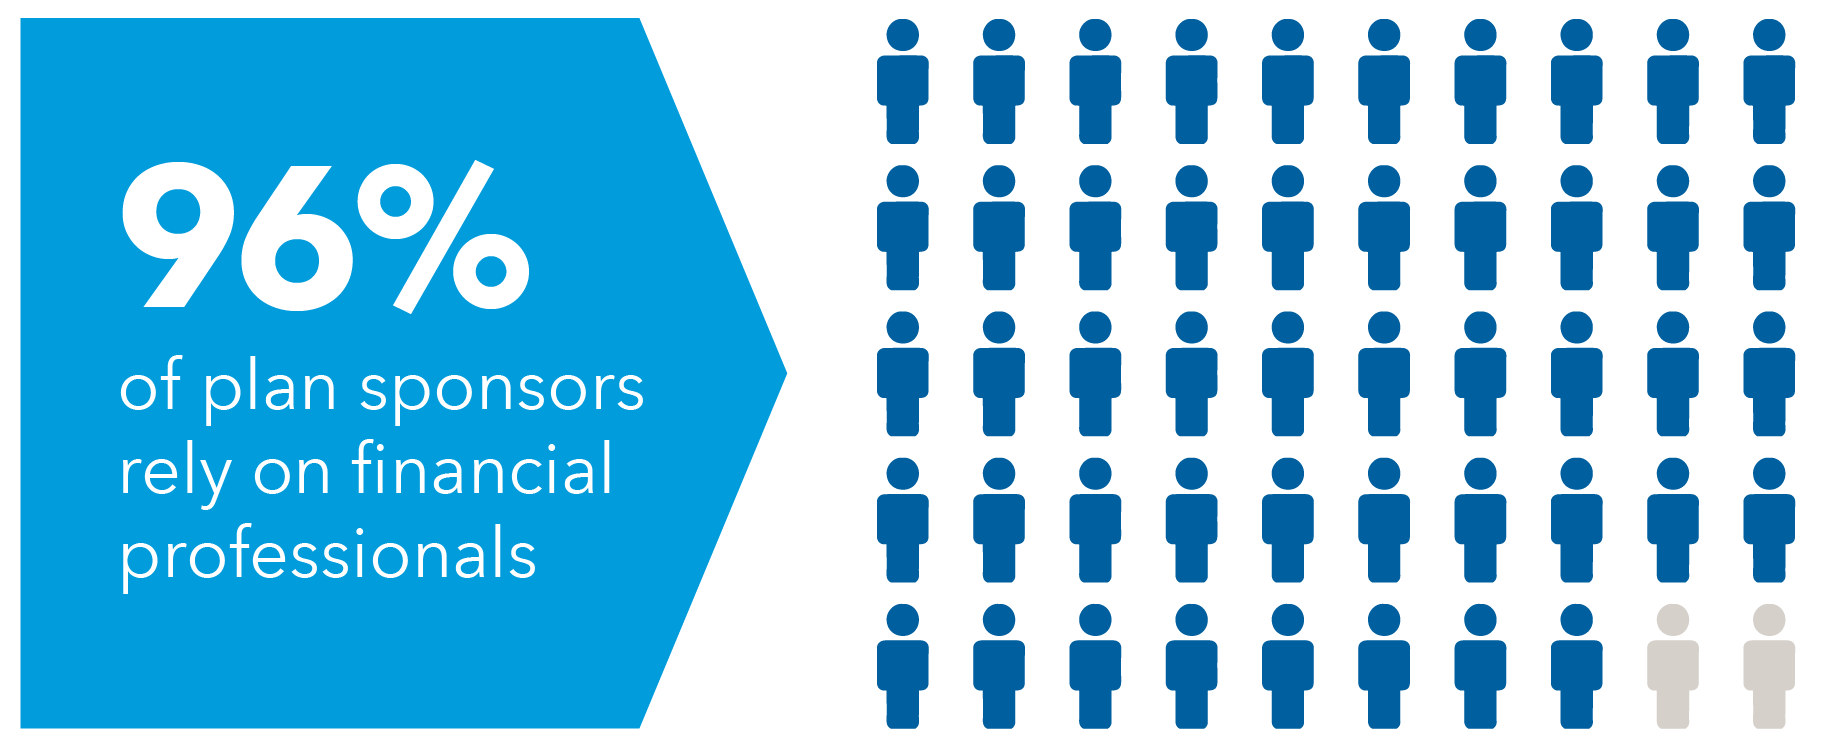 The left side of this chart states that 96% of plan sponsors rely on financial professionals. The right side shows 50 people icons to represent the total number of plan sponsors in the survey, with 48 shaded blue to represent the 96% that rely on plan sponsors and two shaded gray to represent the rest.